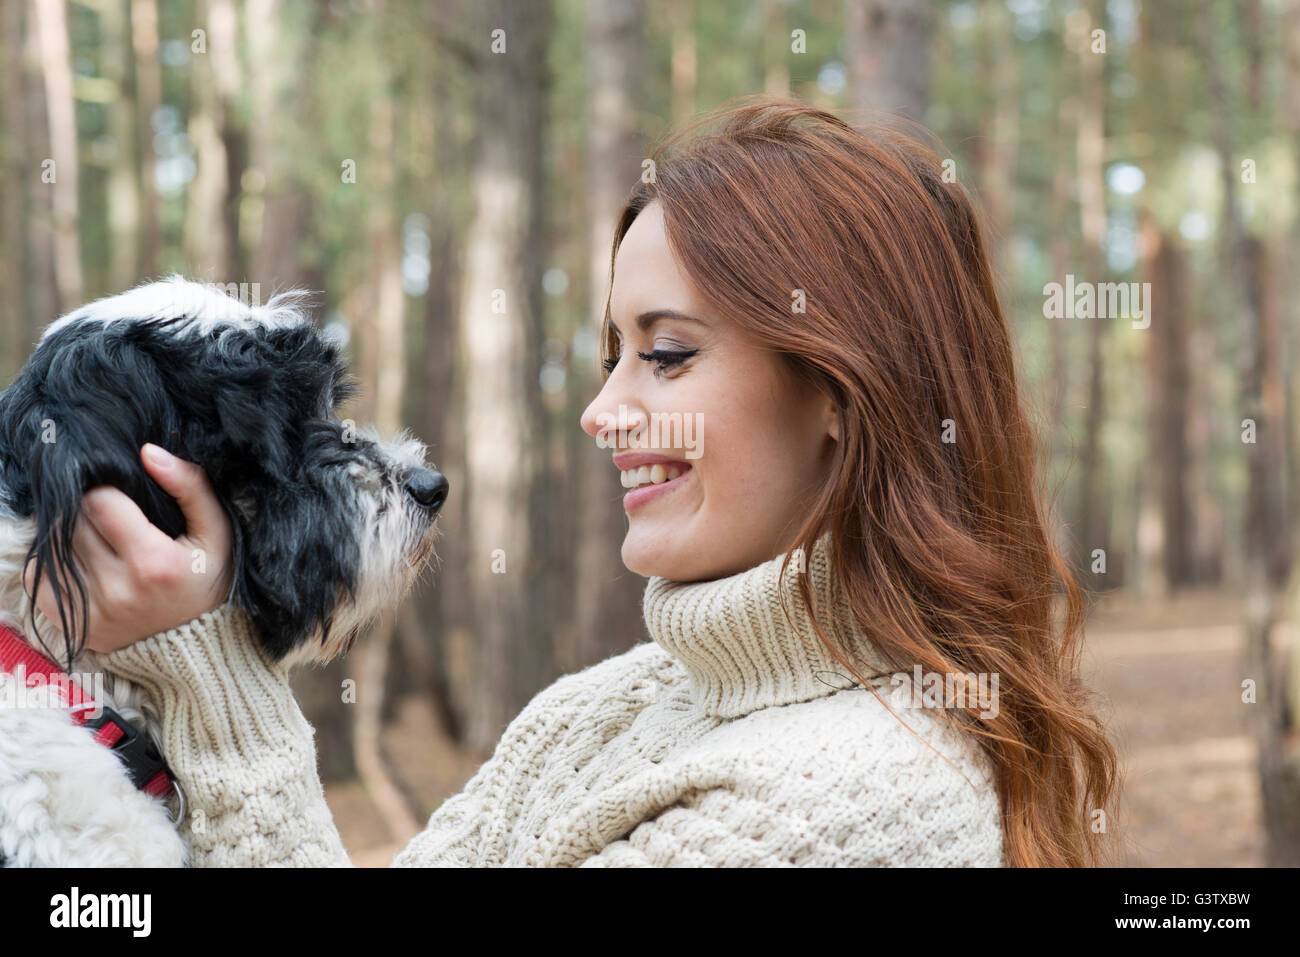 A young woman stroking a dog on a forest walk in Autumn. Stock Photo